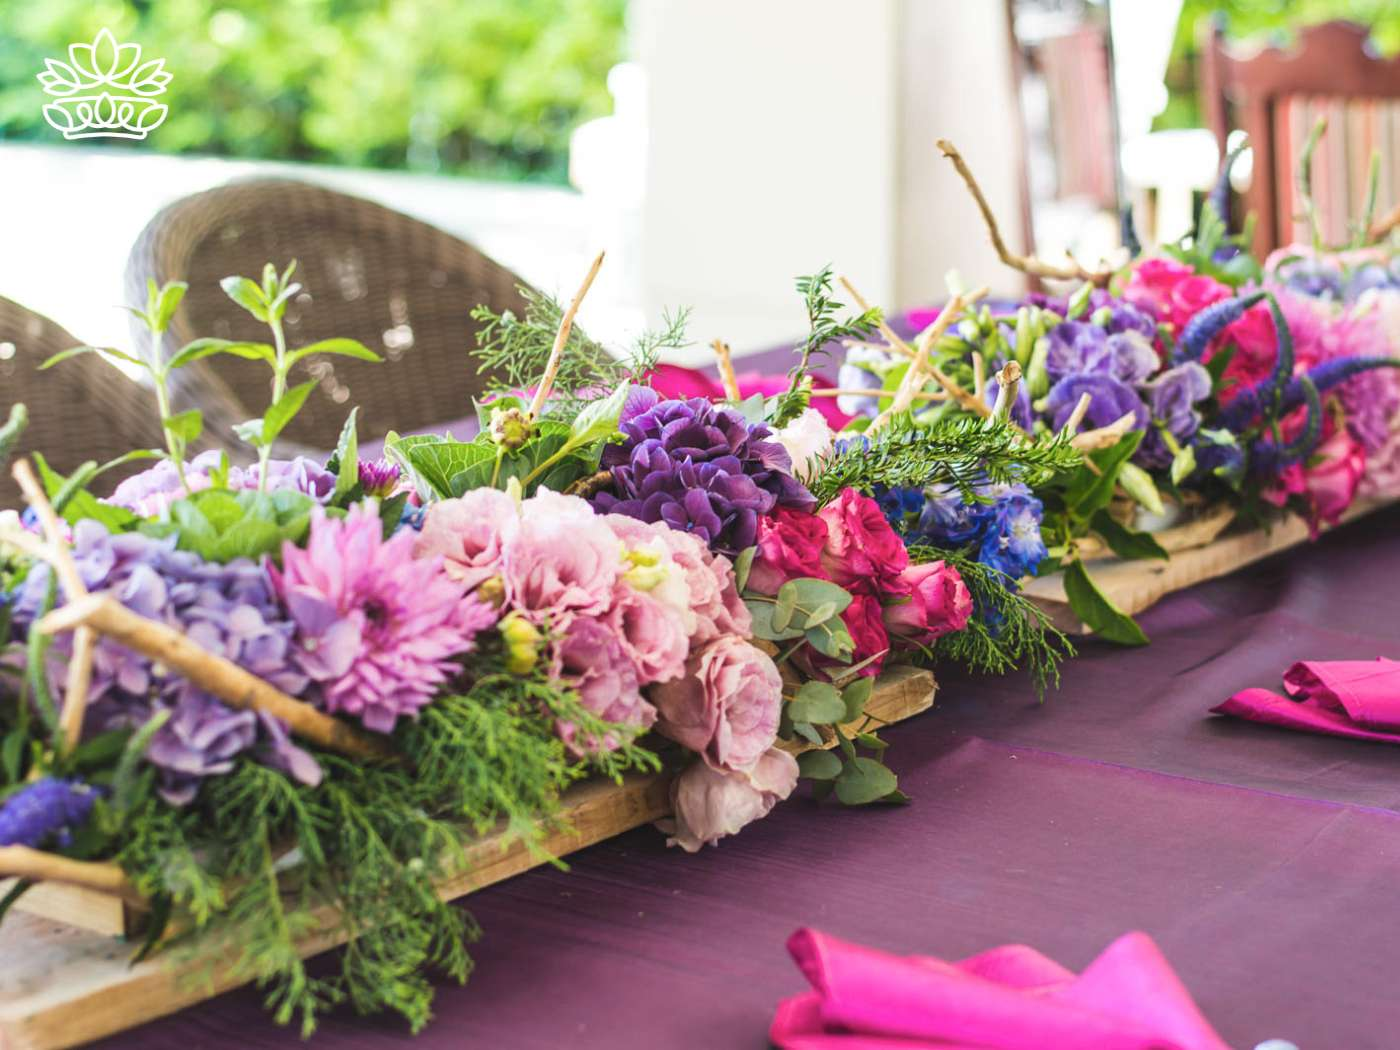 A lush and artful floral arrangement stretching across a banquet table, featuring a harmonious mix of hydrangeas and pink blooms, crafted by the skilled online florist at Fabulous Flowers and Gifts.